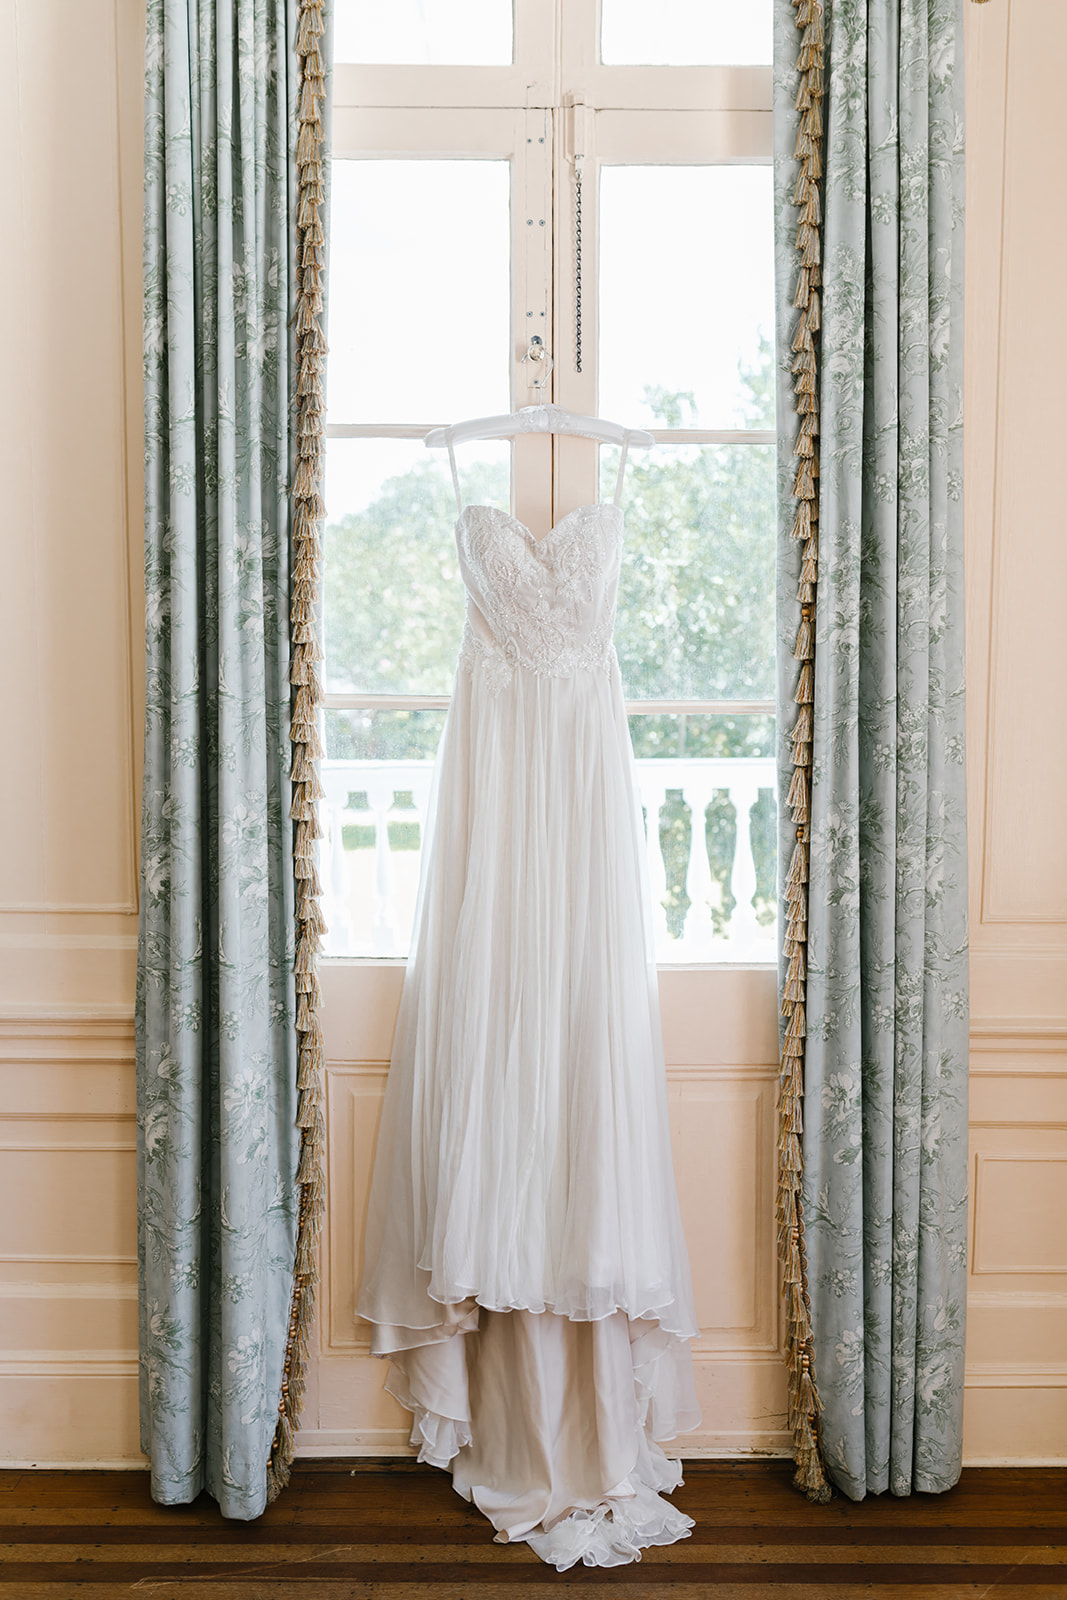 Classic details at an Intimate waterfront wedding at Lowndes Grove